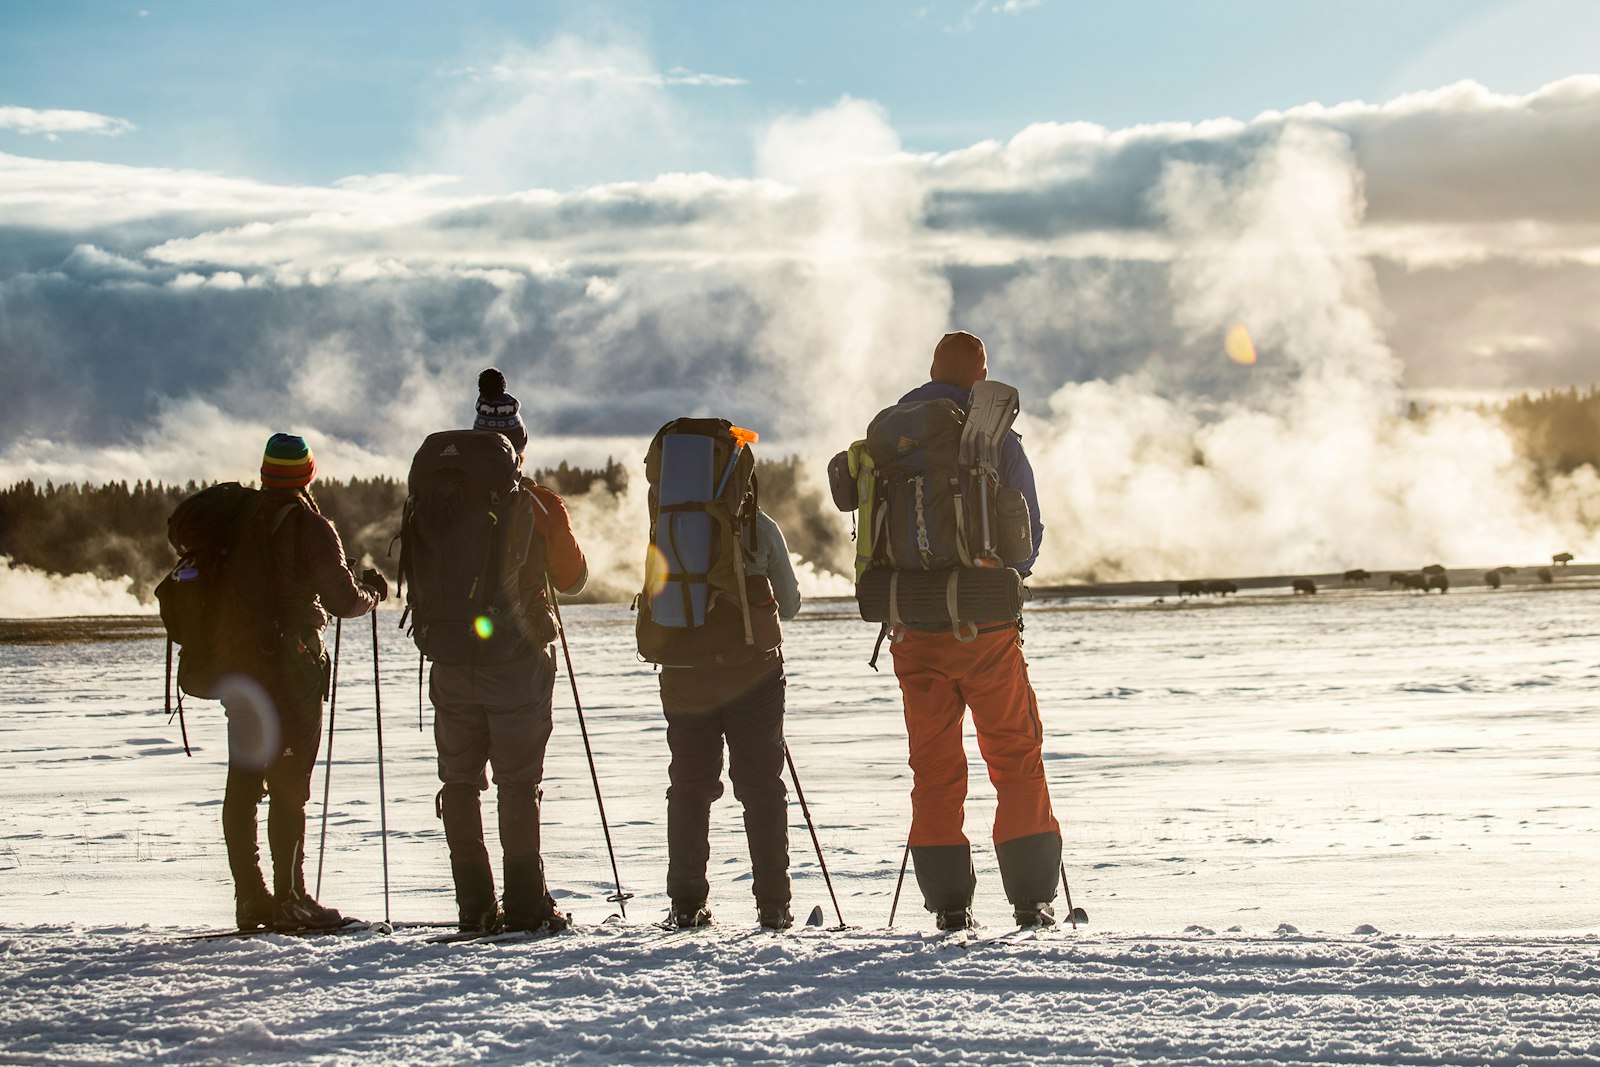 Four hikers watch a geyser in winter